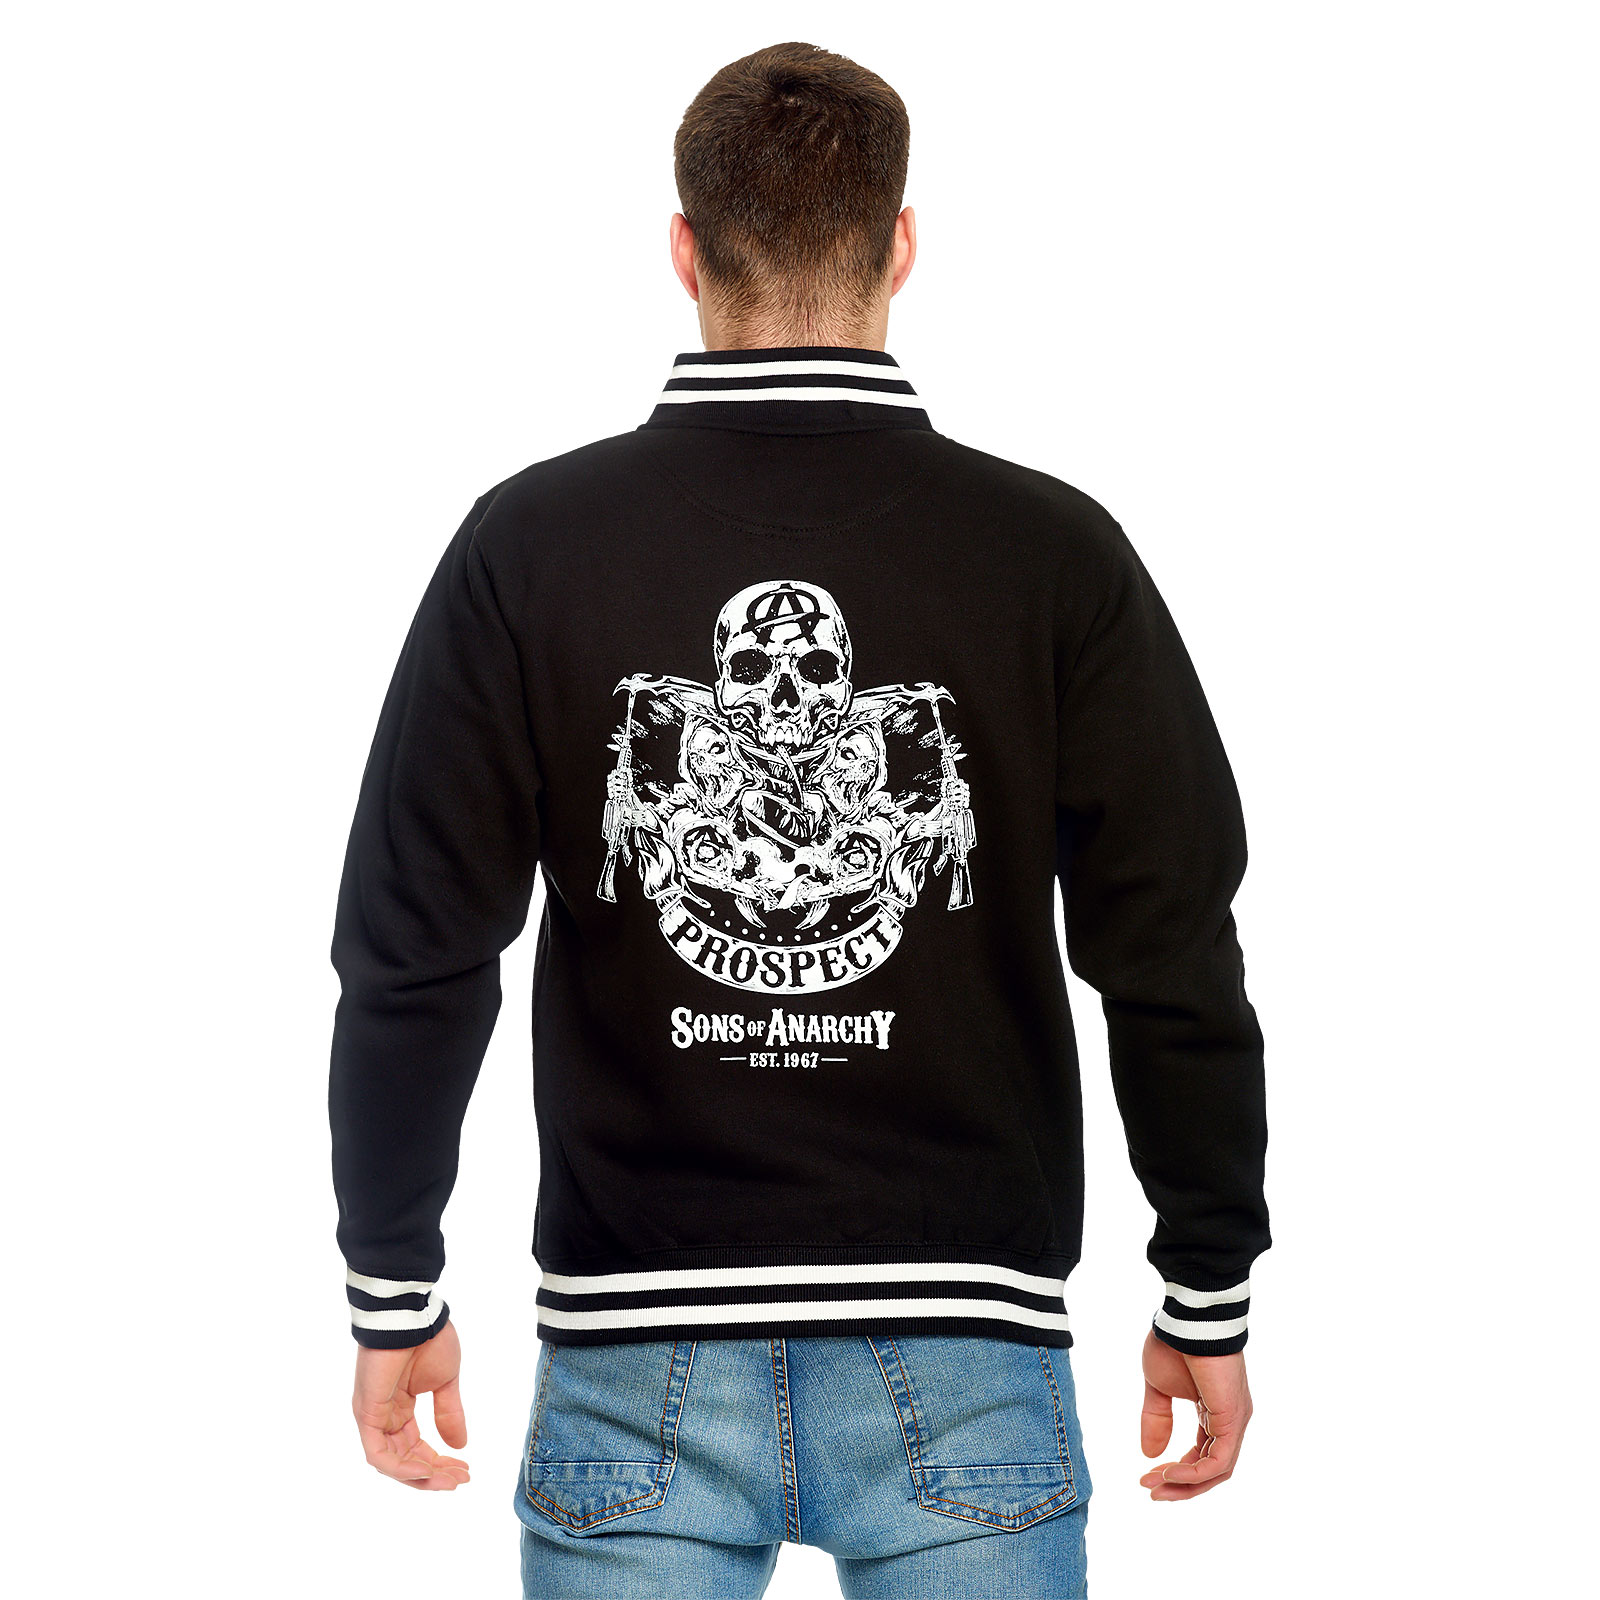 Sons of Anarchy - Reaper & Prospect College Jacket black-white